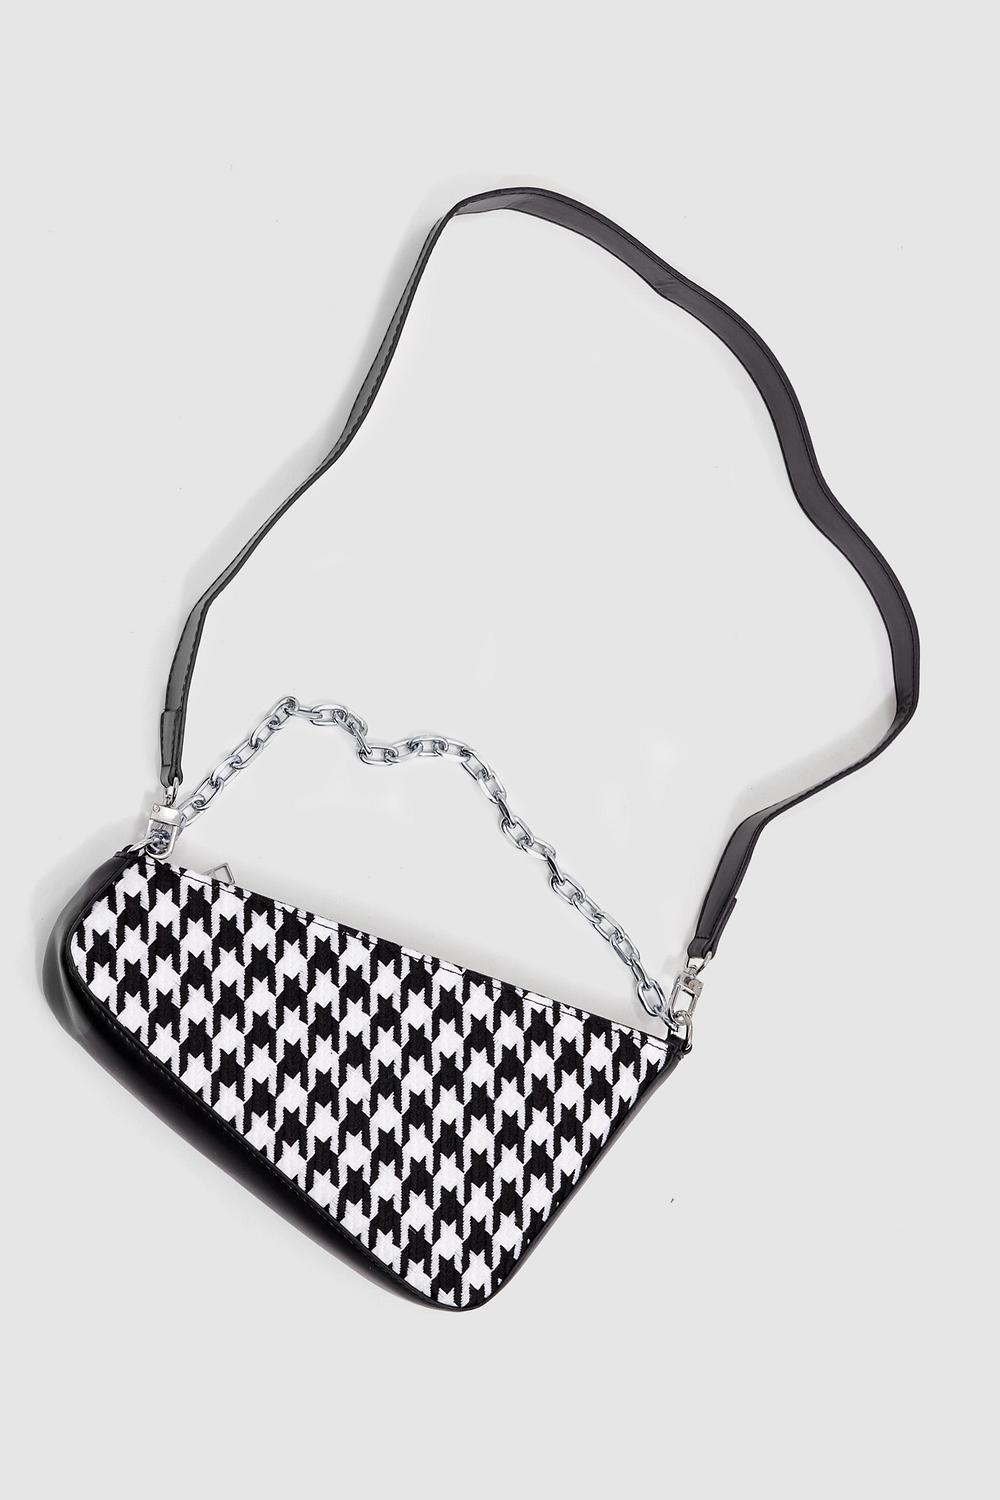 Black bag with houndstooth print